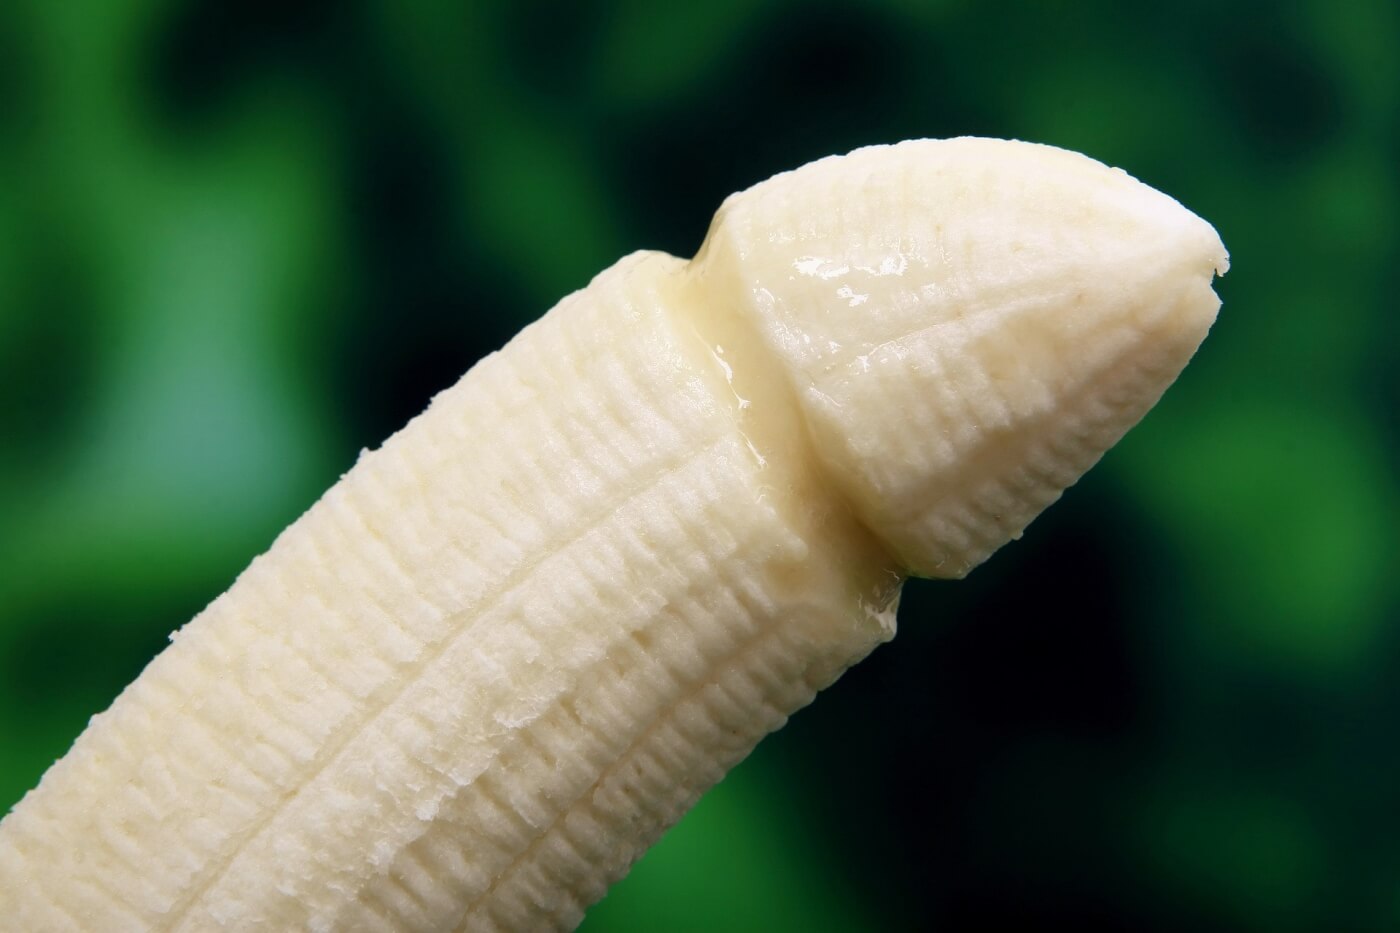 suggestive banana green background PETA Calls For Strike on Sex With Meat-Eating Men